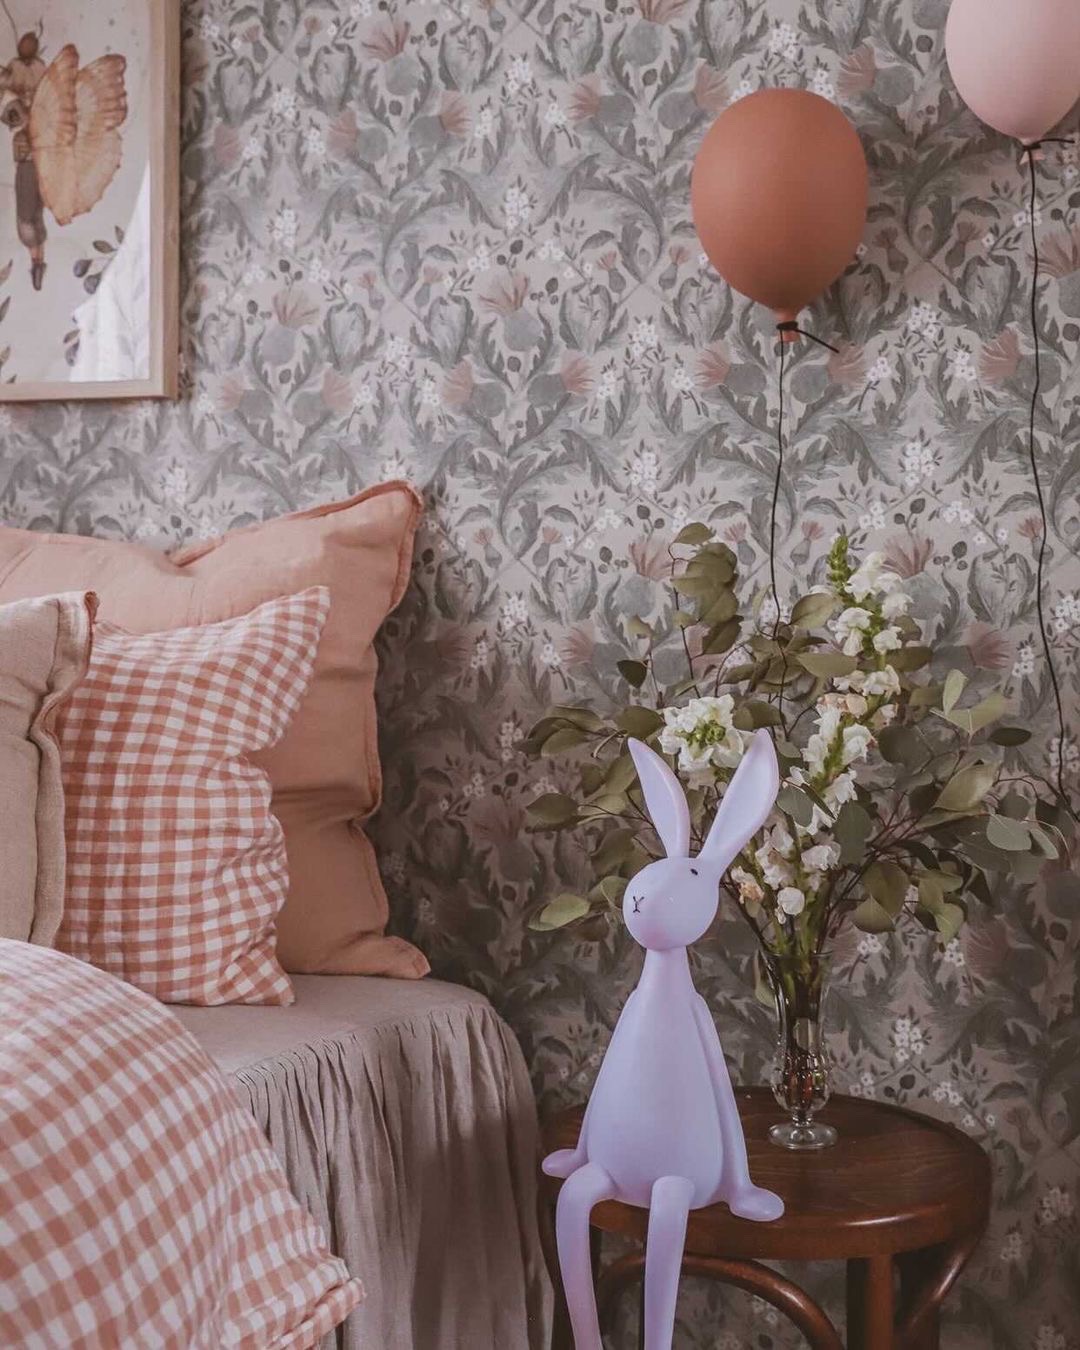 Creating-Whimsical-Bedrooms-Melissa-Lerone-Stylist-#Littlefrenchheart 